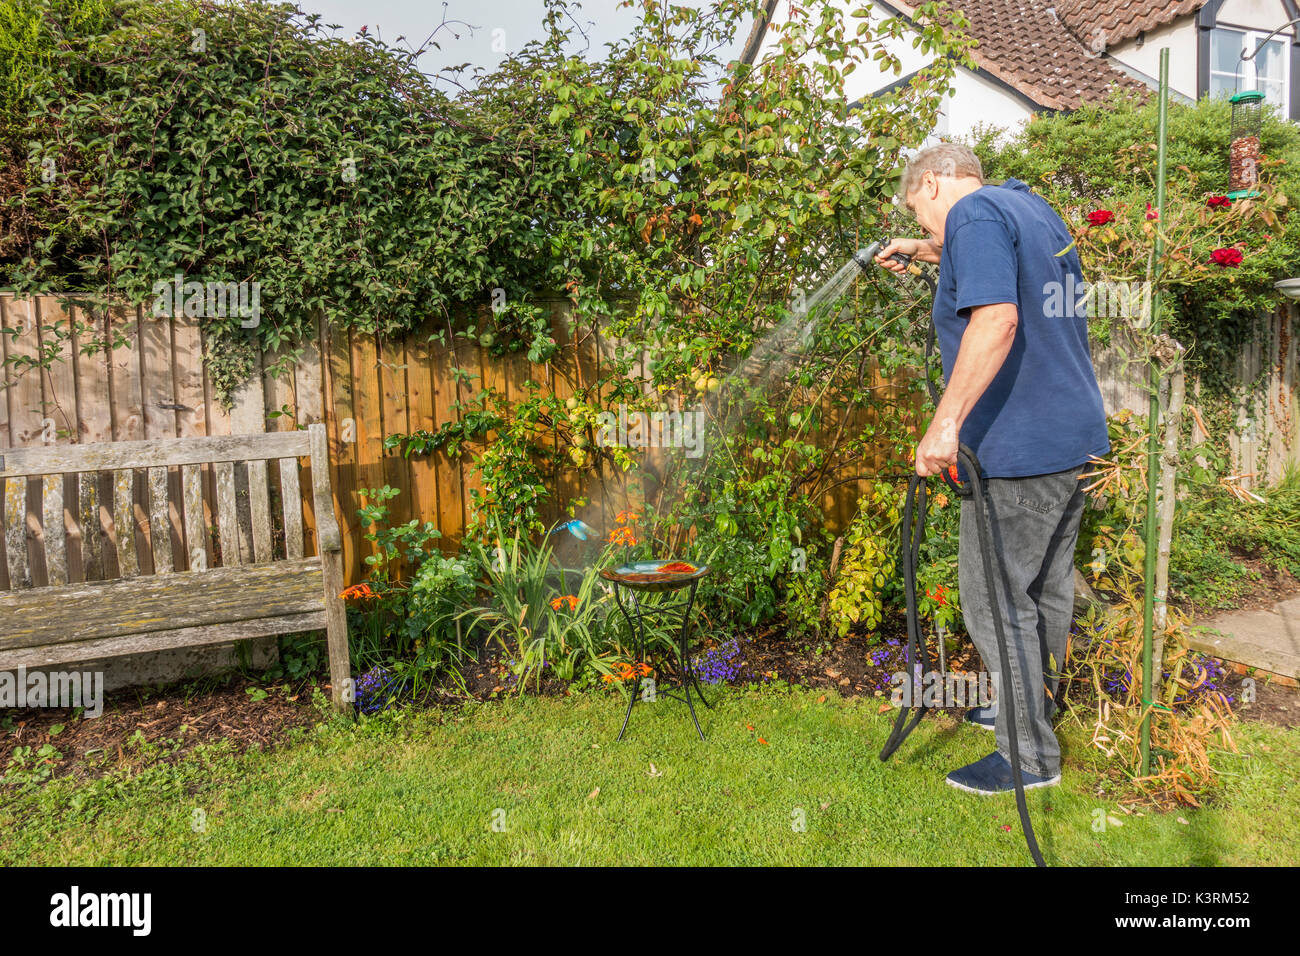 An older man watering his garden plants, early autumn, with a hose and spray attachment. Langtoft, Lincolnshire, England, UK. Stock Photo